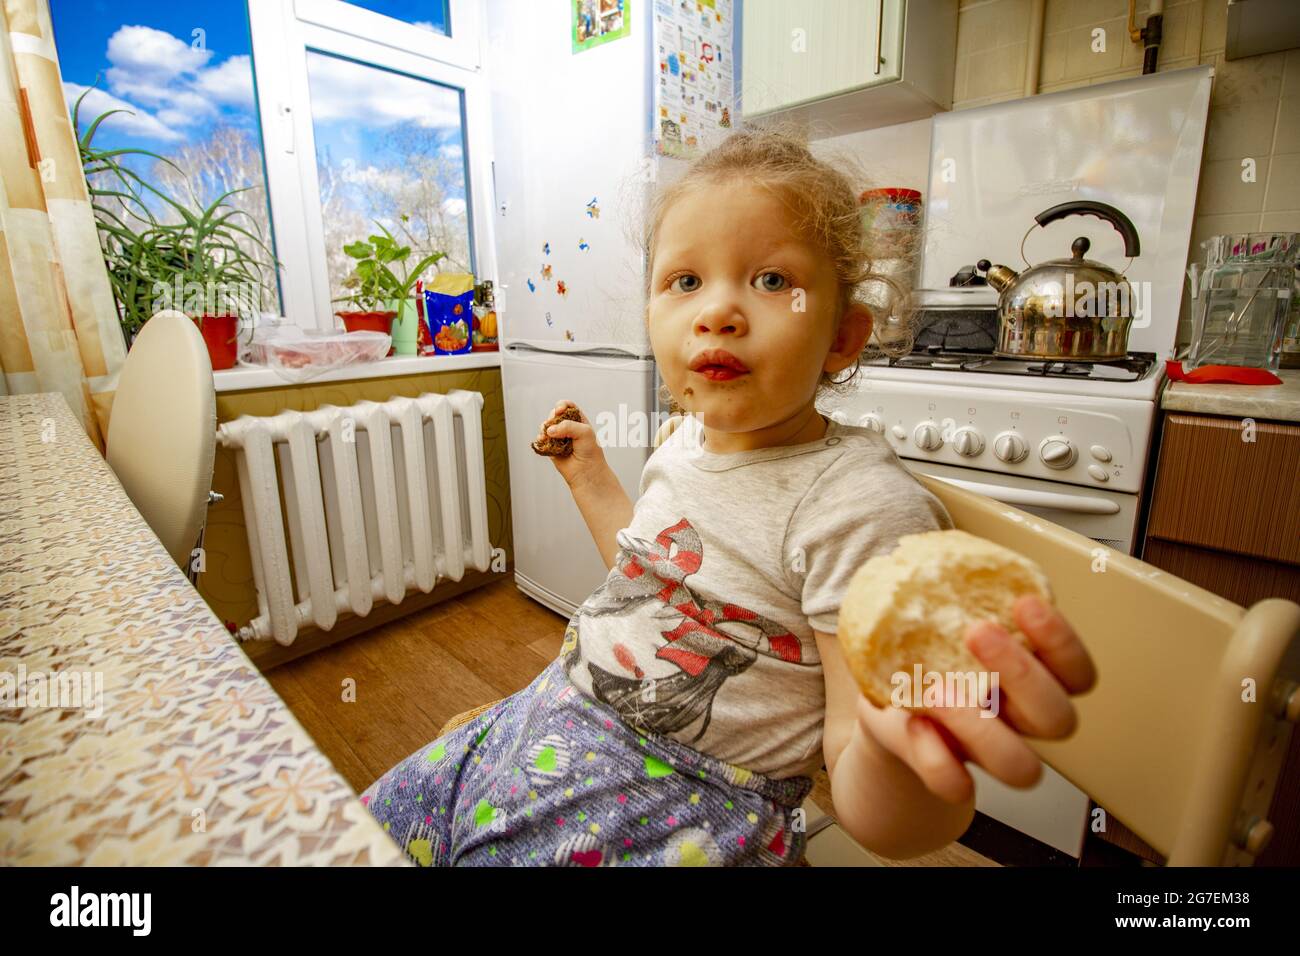 A young girl is eating dark and light bread at the same time in the kitchen. Stock Photo